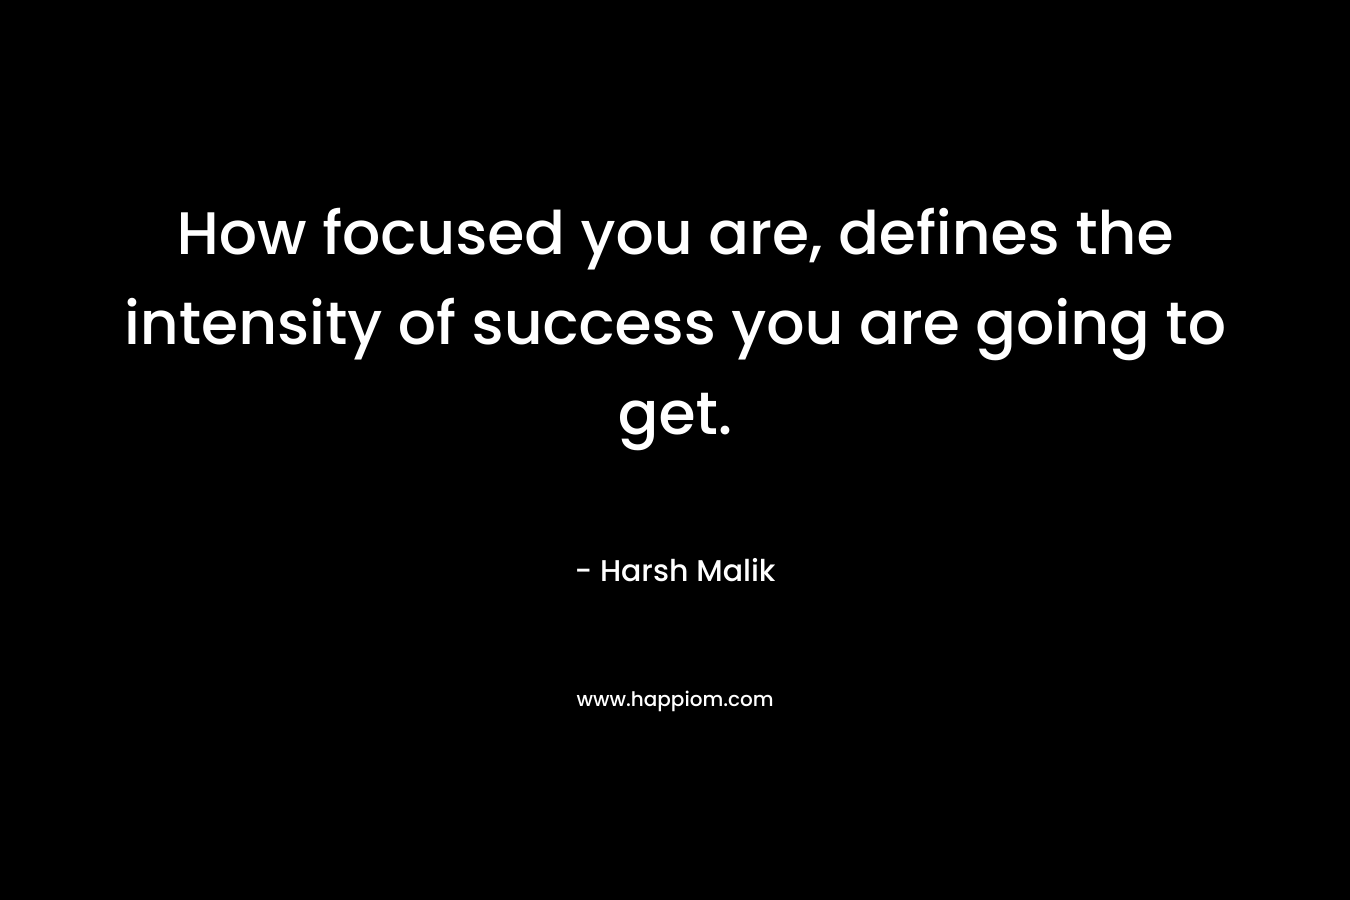 How focused you are, defines the intensity of success you are going to get.